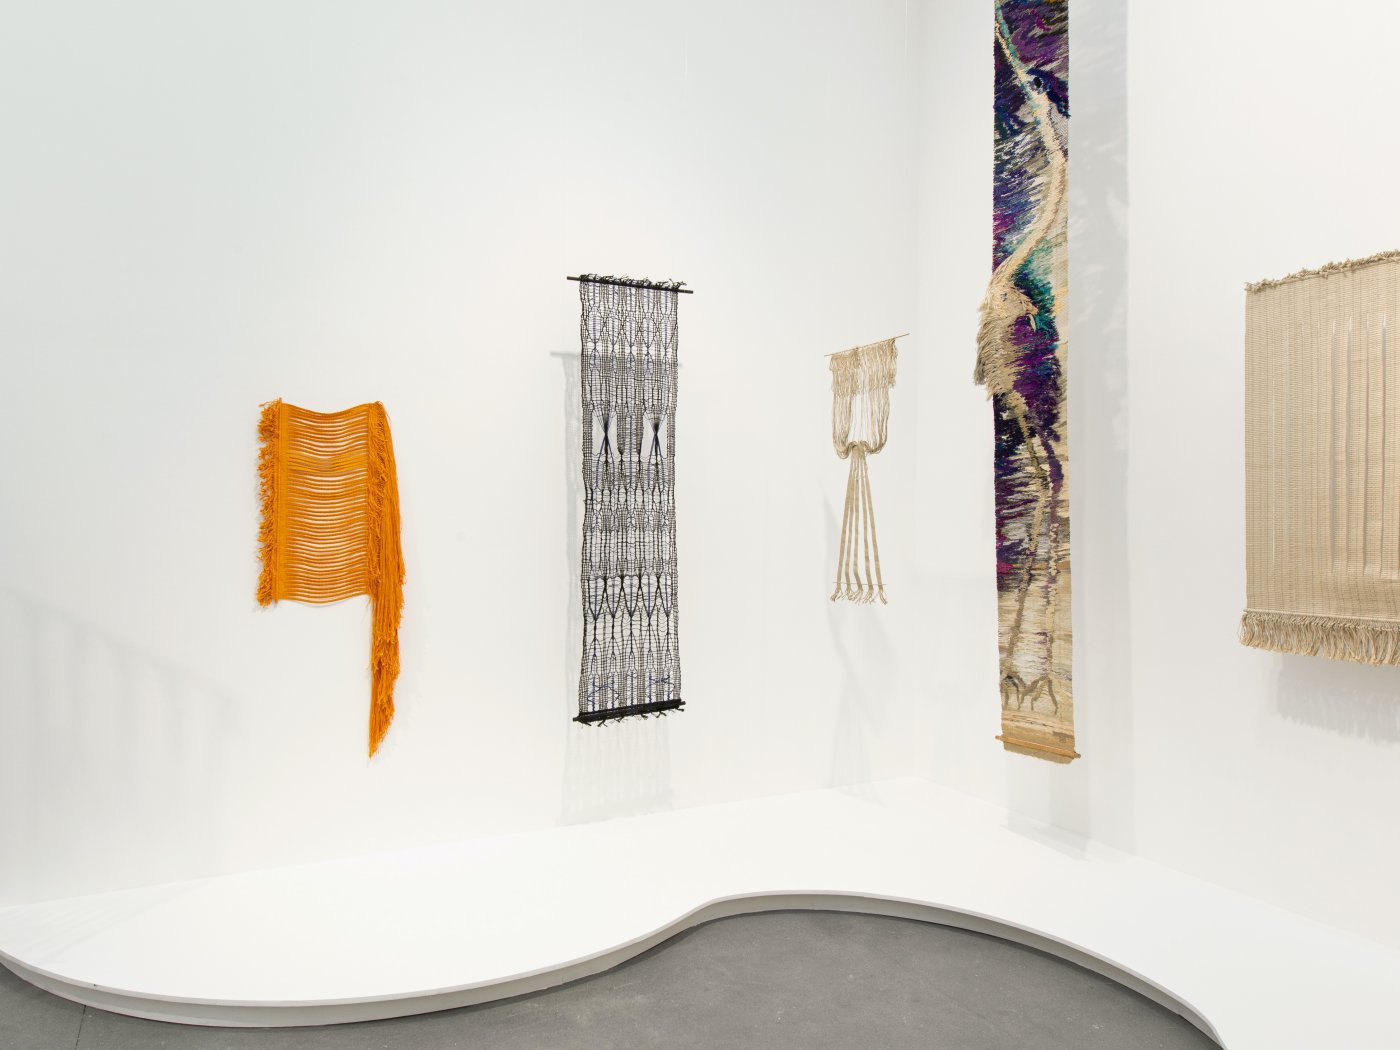 Installation image for Lenore Tawney: Part One, at Alison Jacques